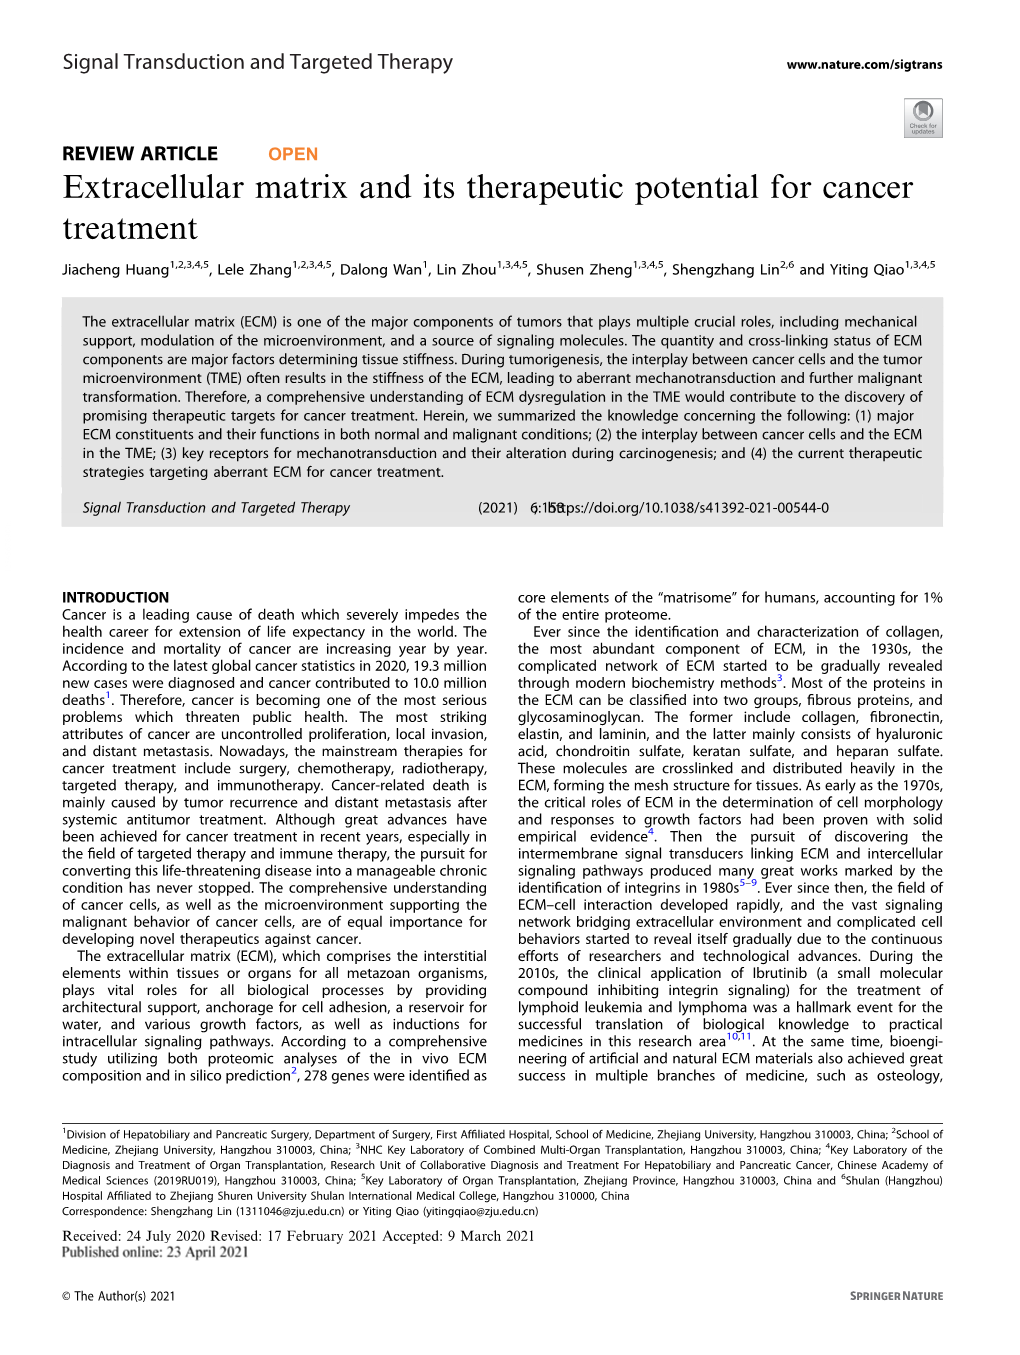 Extracellular Matrix and Its Therapeutic Potential for Cancer Treatment